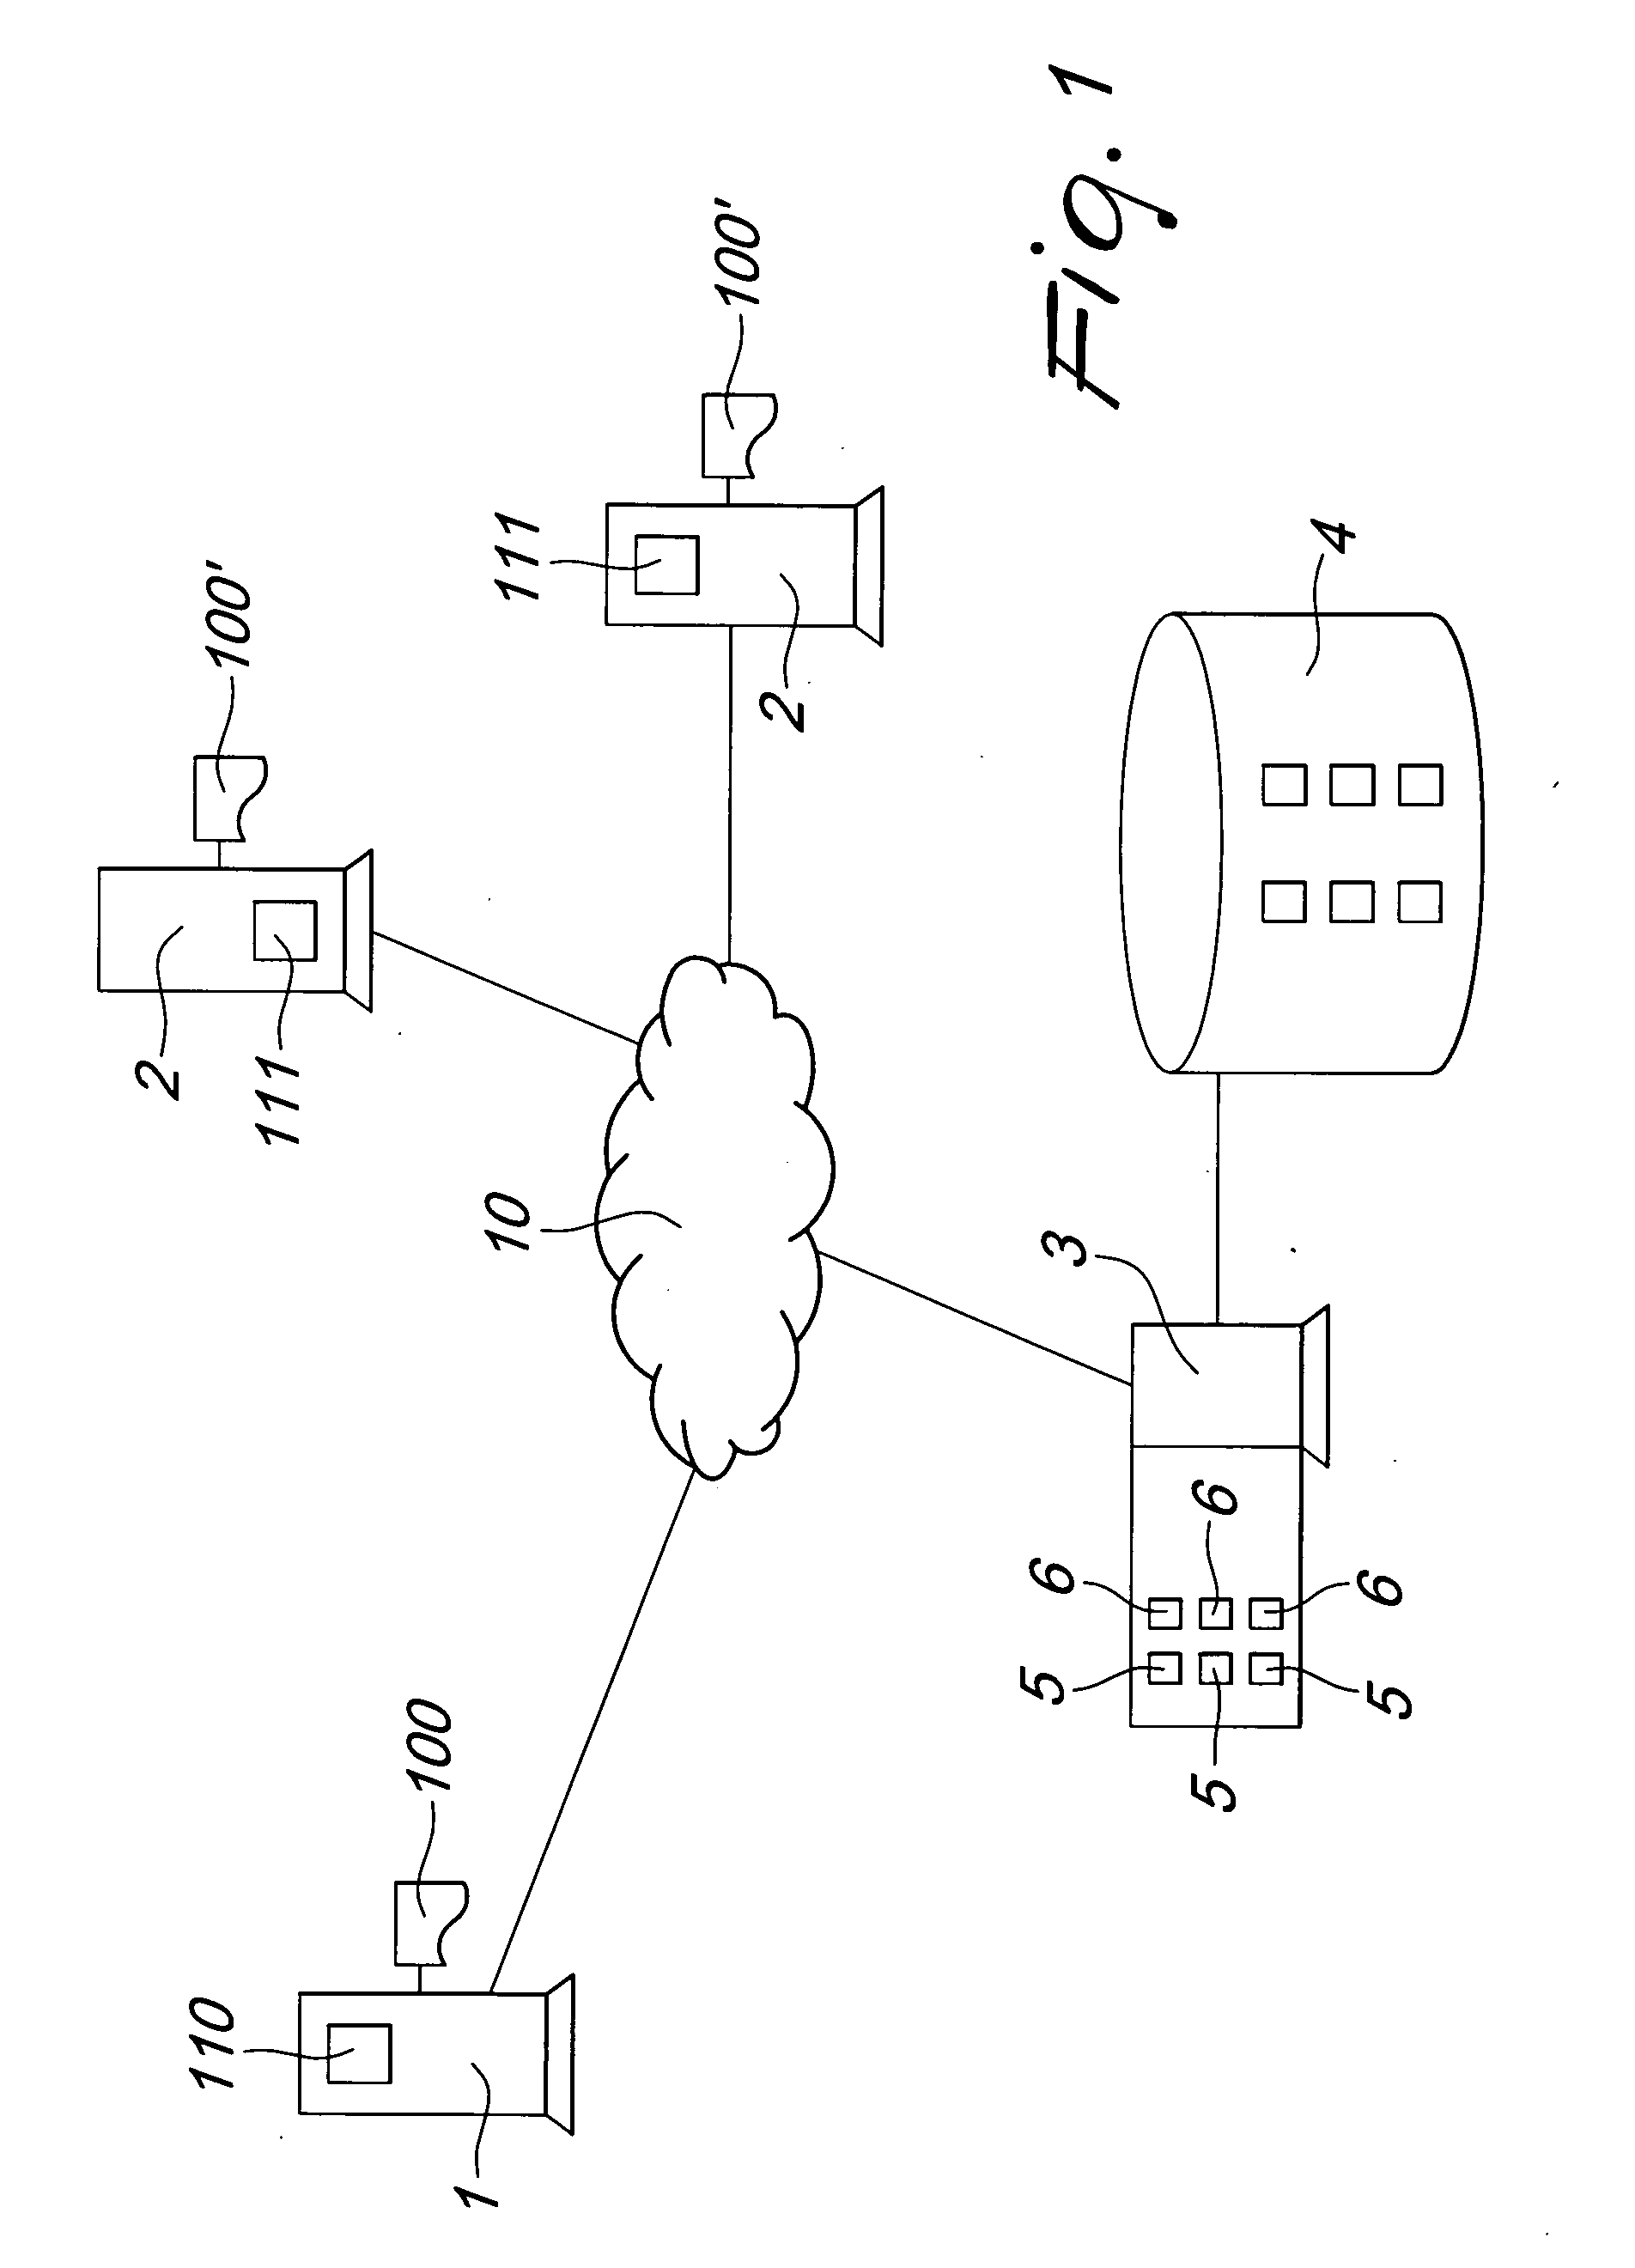 Method and system for exchanging digital documents